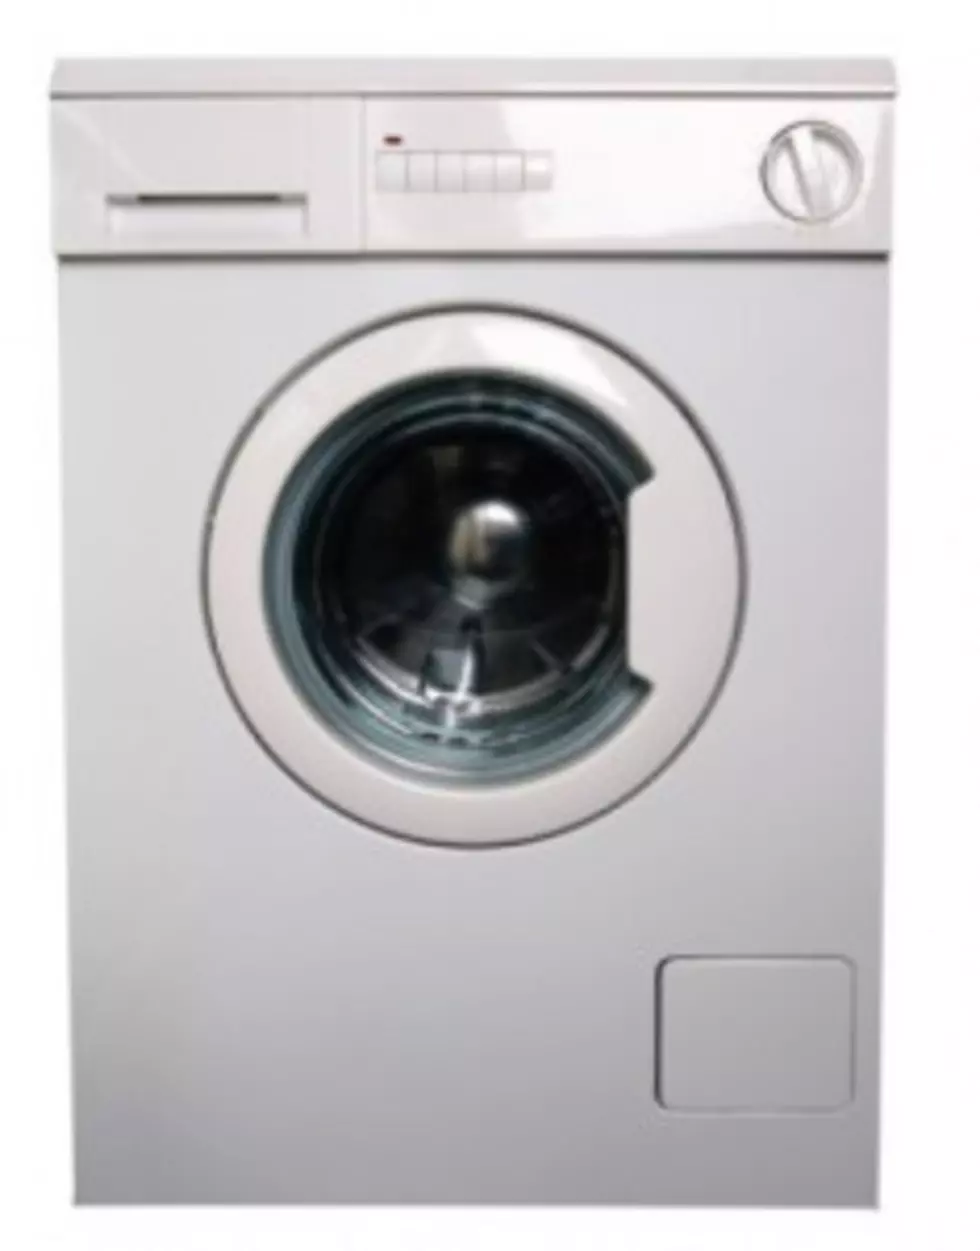 NYSERDA To Offer Rebates On Energy Efficient Clothes Washers And Refrigerators